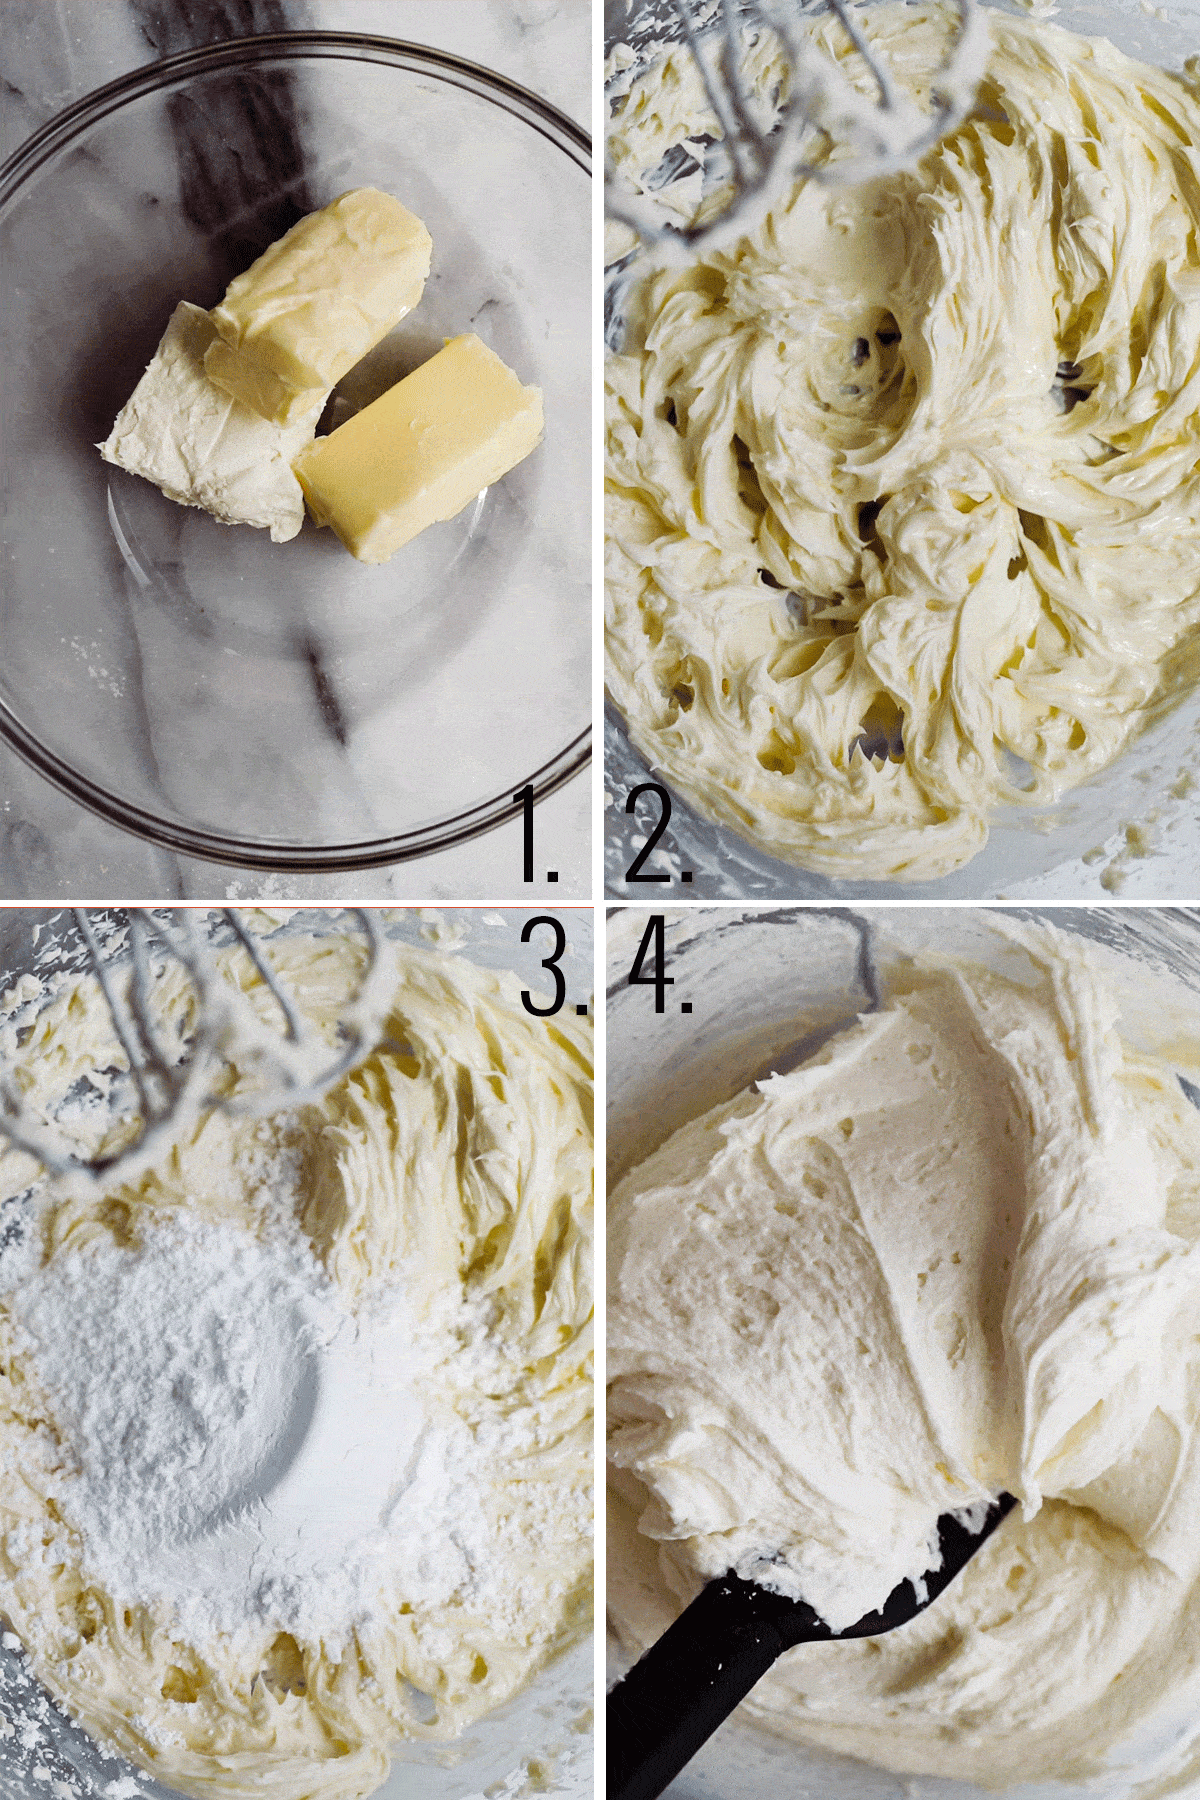 Four Photos showing cream cheese and powder sugar being beat together for a fluffy frosting. 